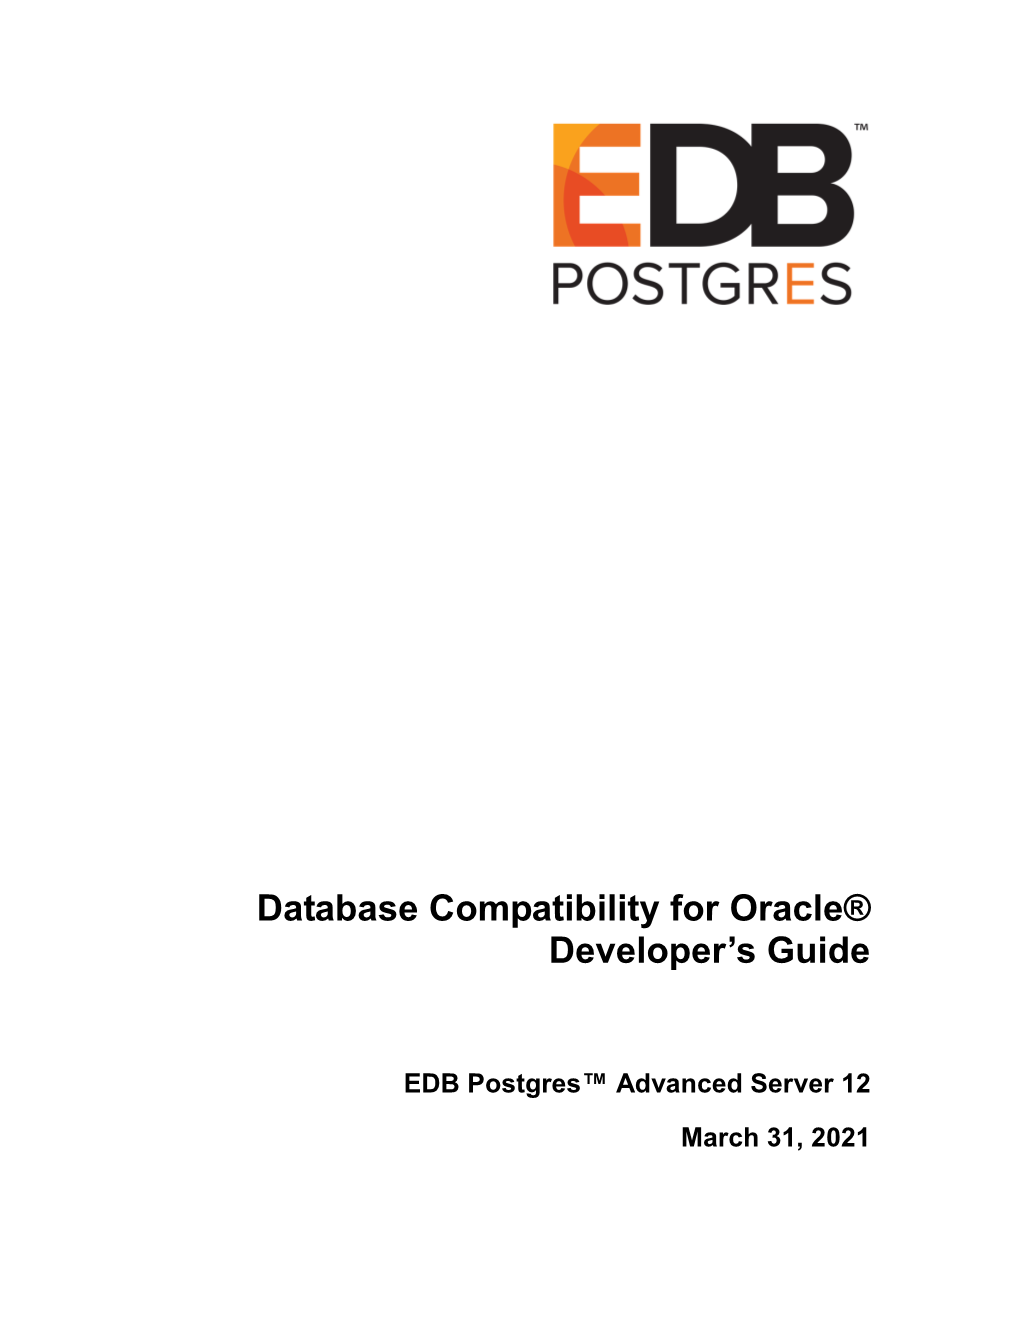 Database Compatibility for Oracle Developer's Guide Provides Detailed Information About